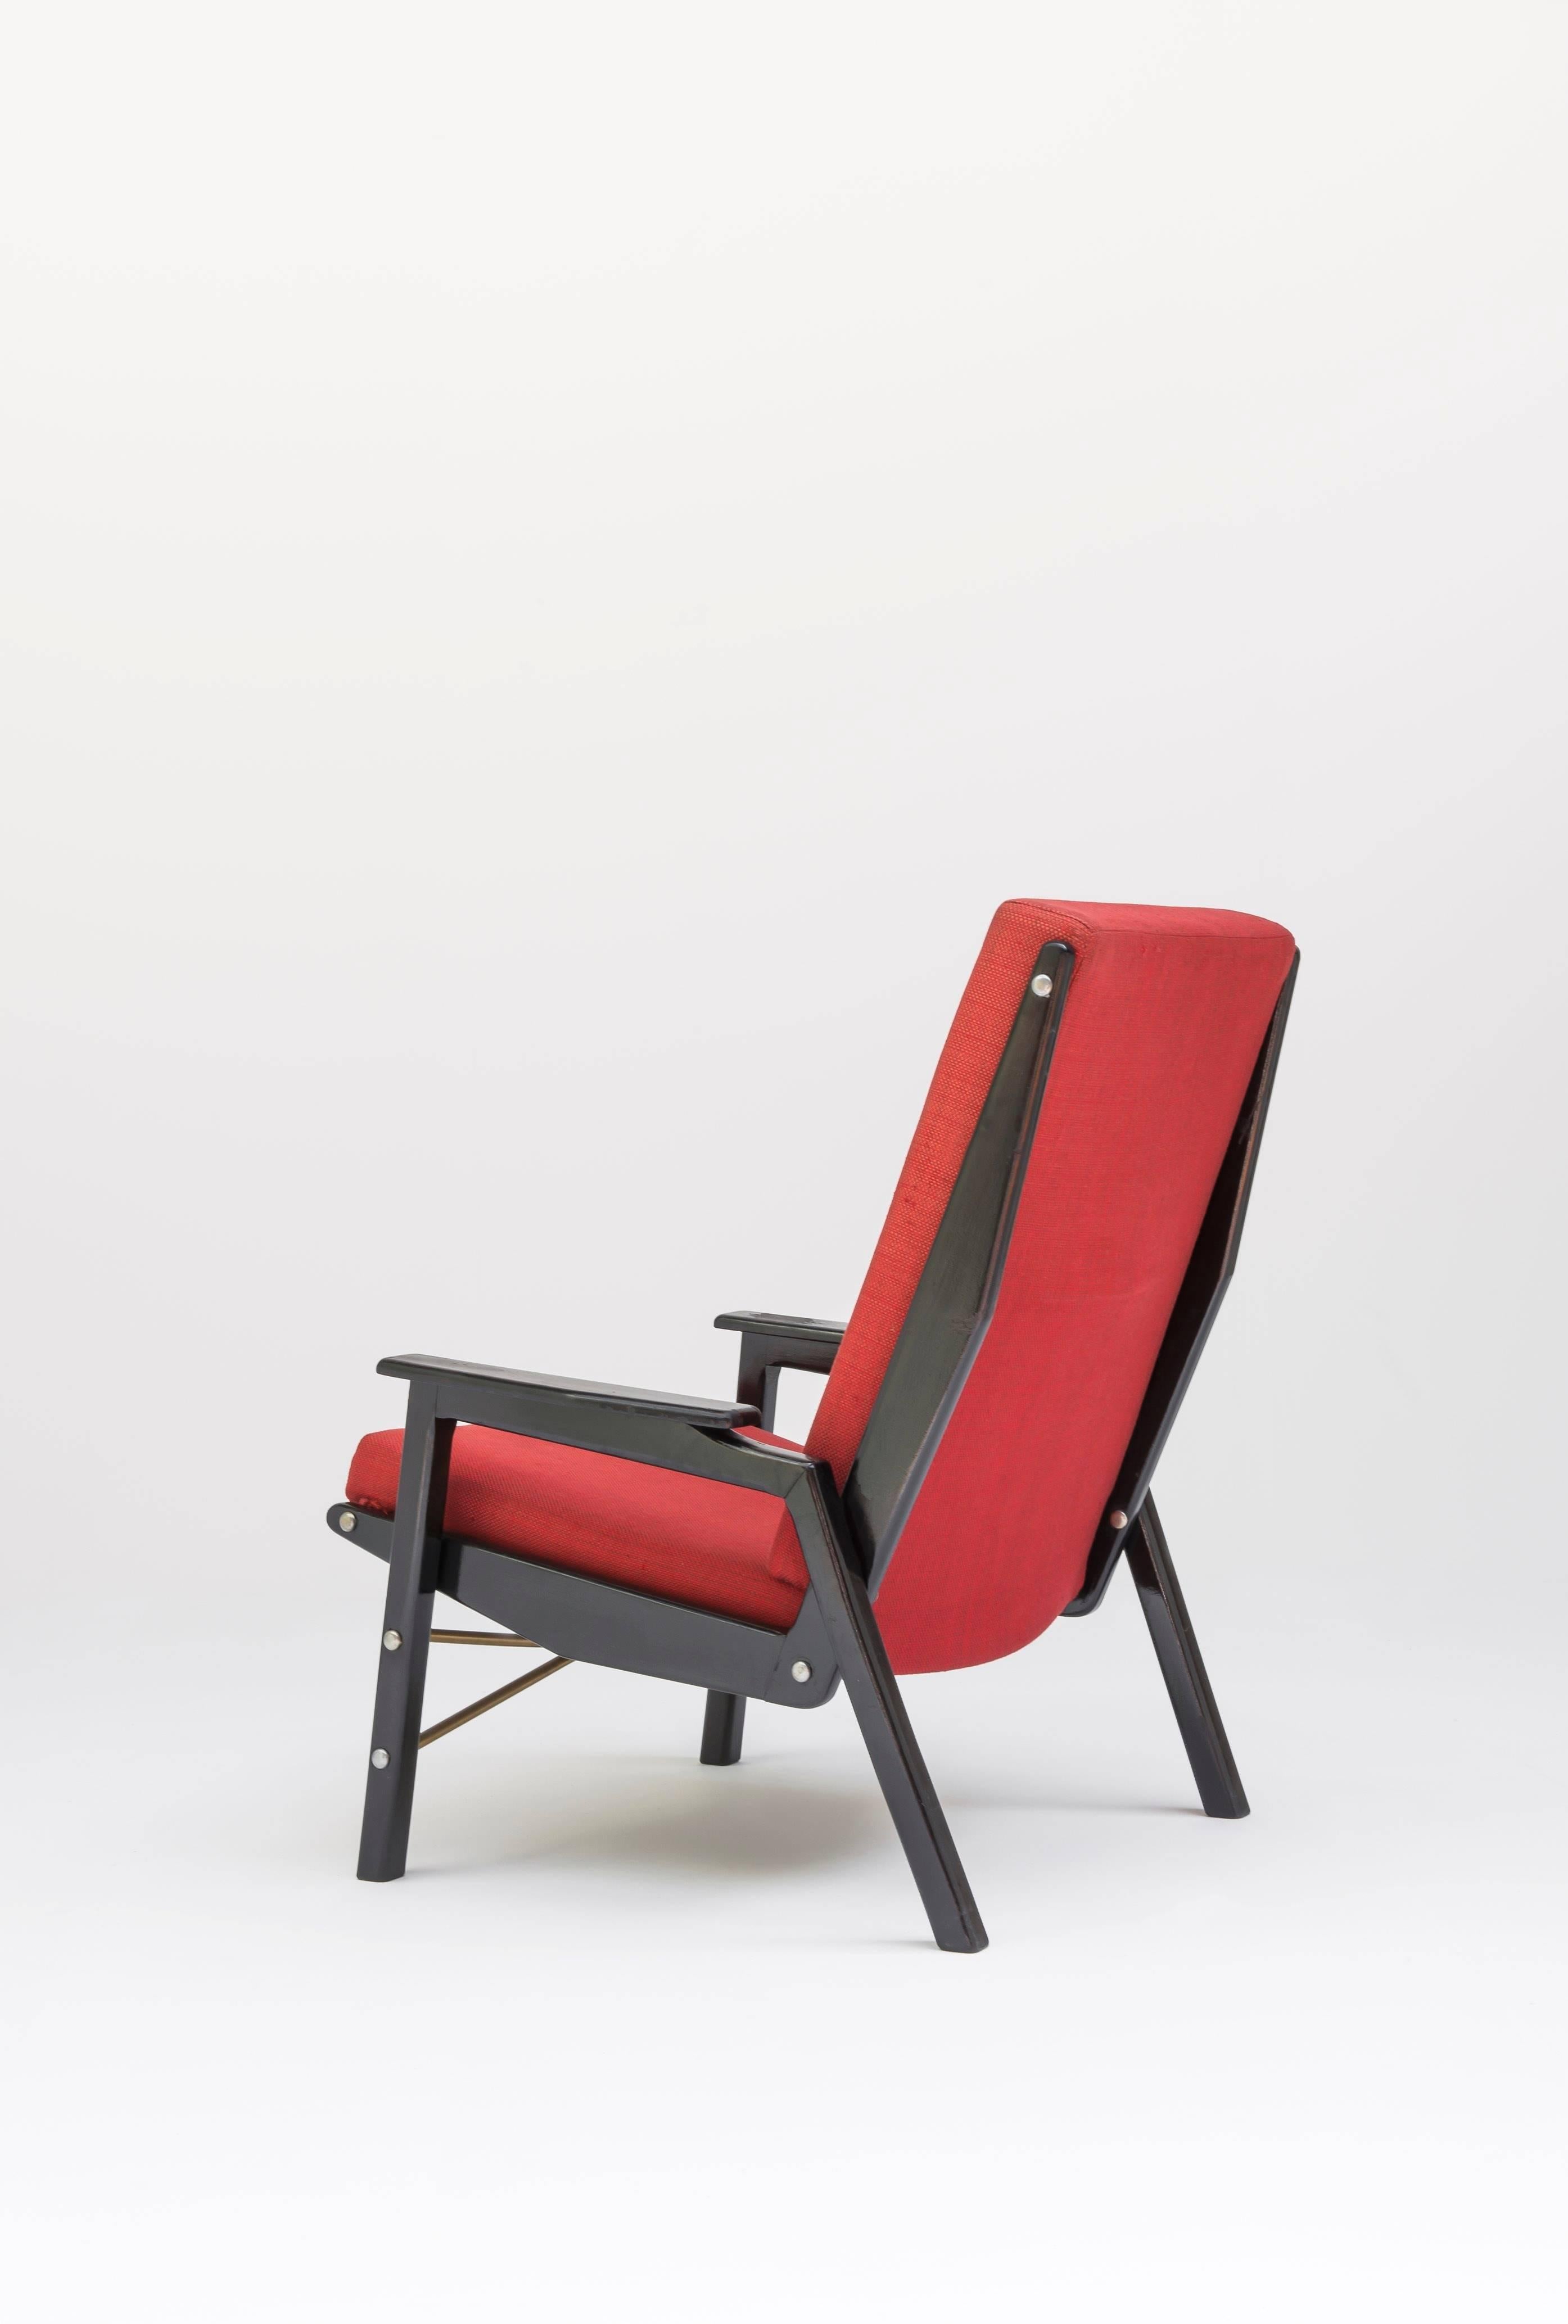 Armchair by Rene-Jean Caillette (1919-2004).
Airborne edition - 1956.